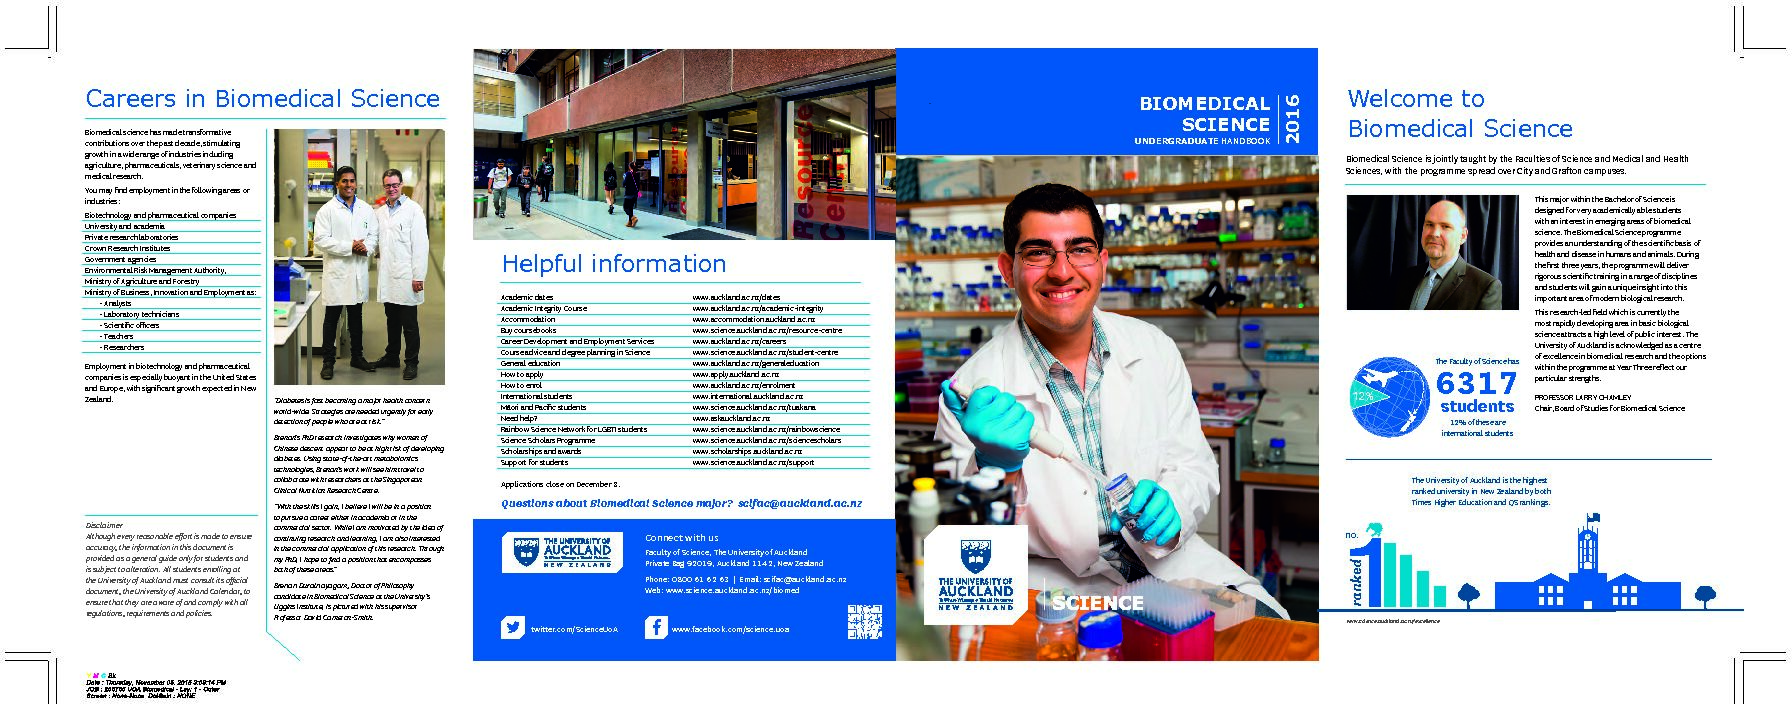 [PDF] Careers in Biomedical Science - The University of Auckland